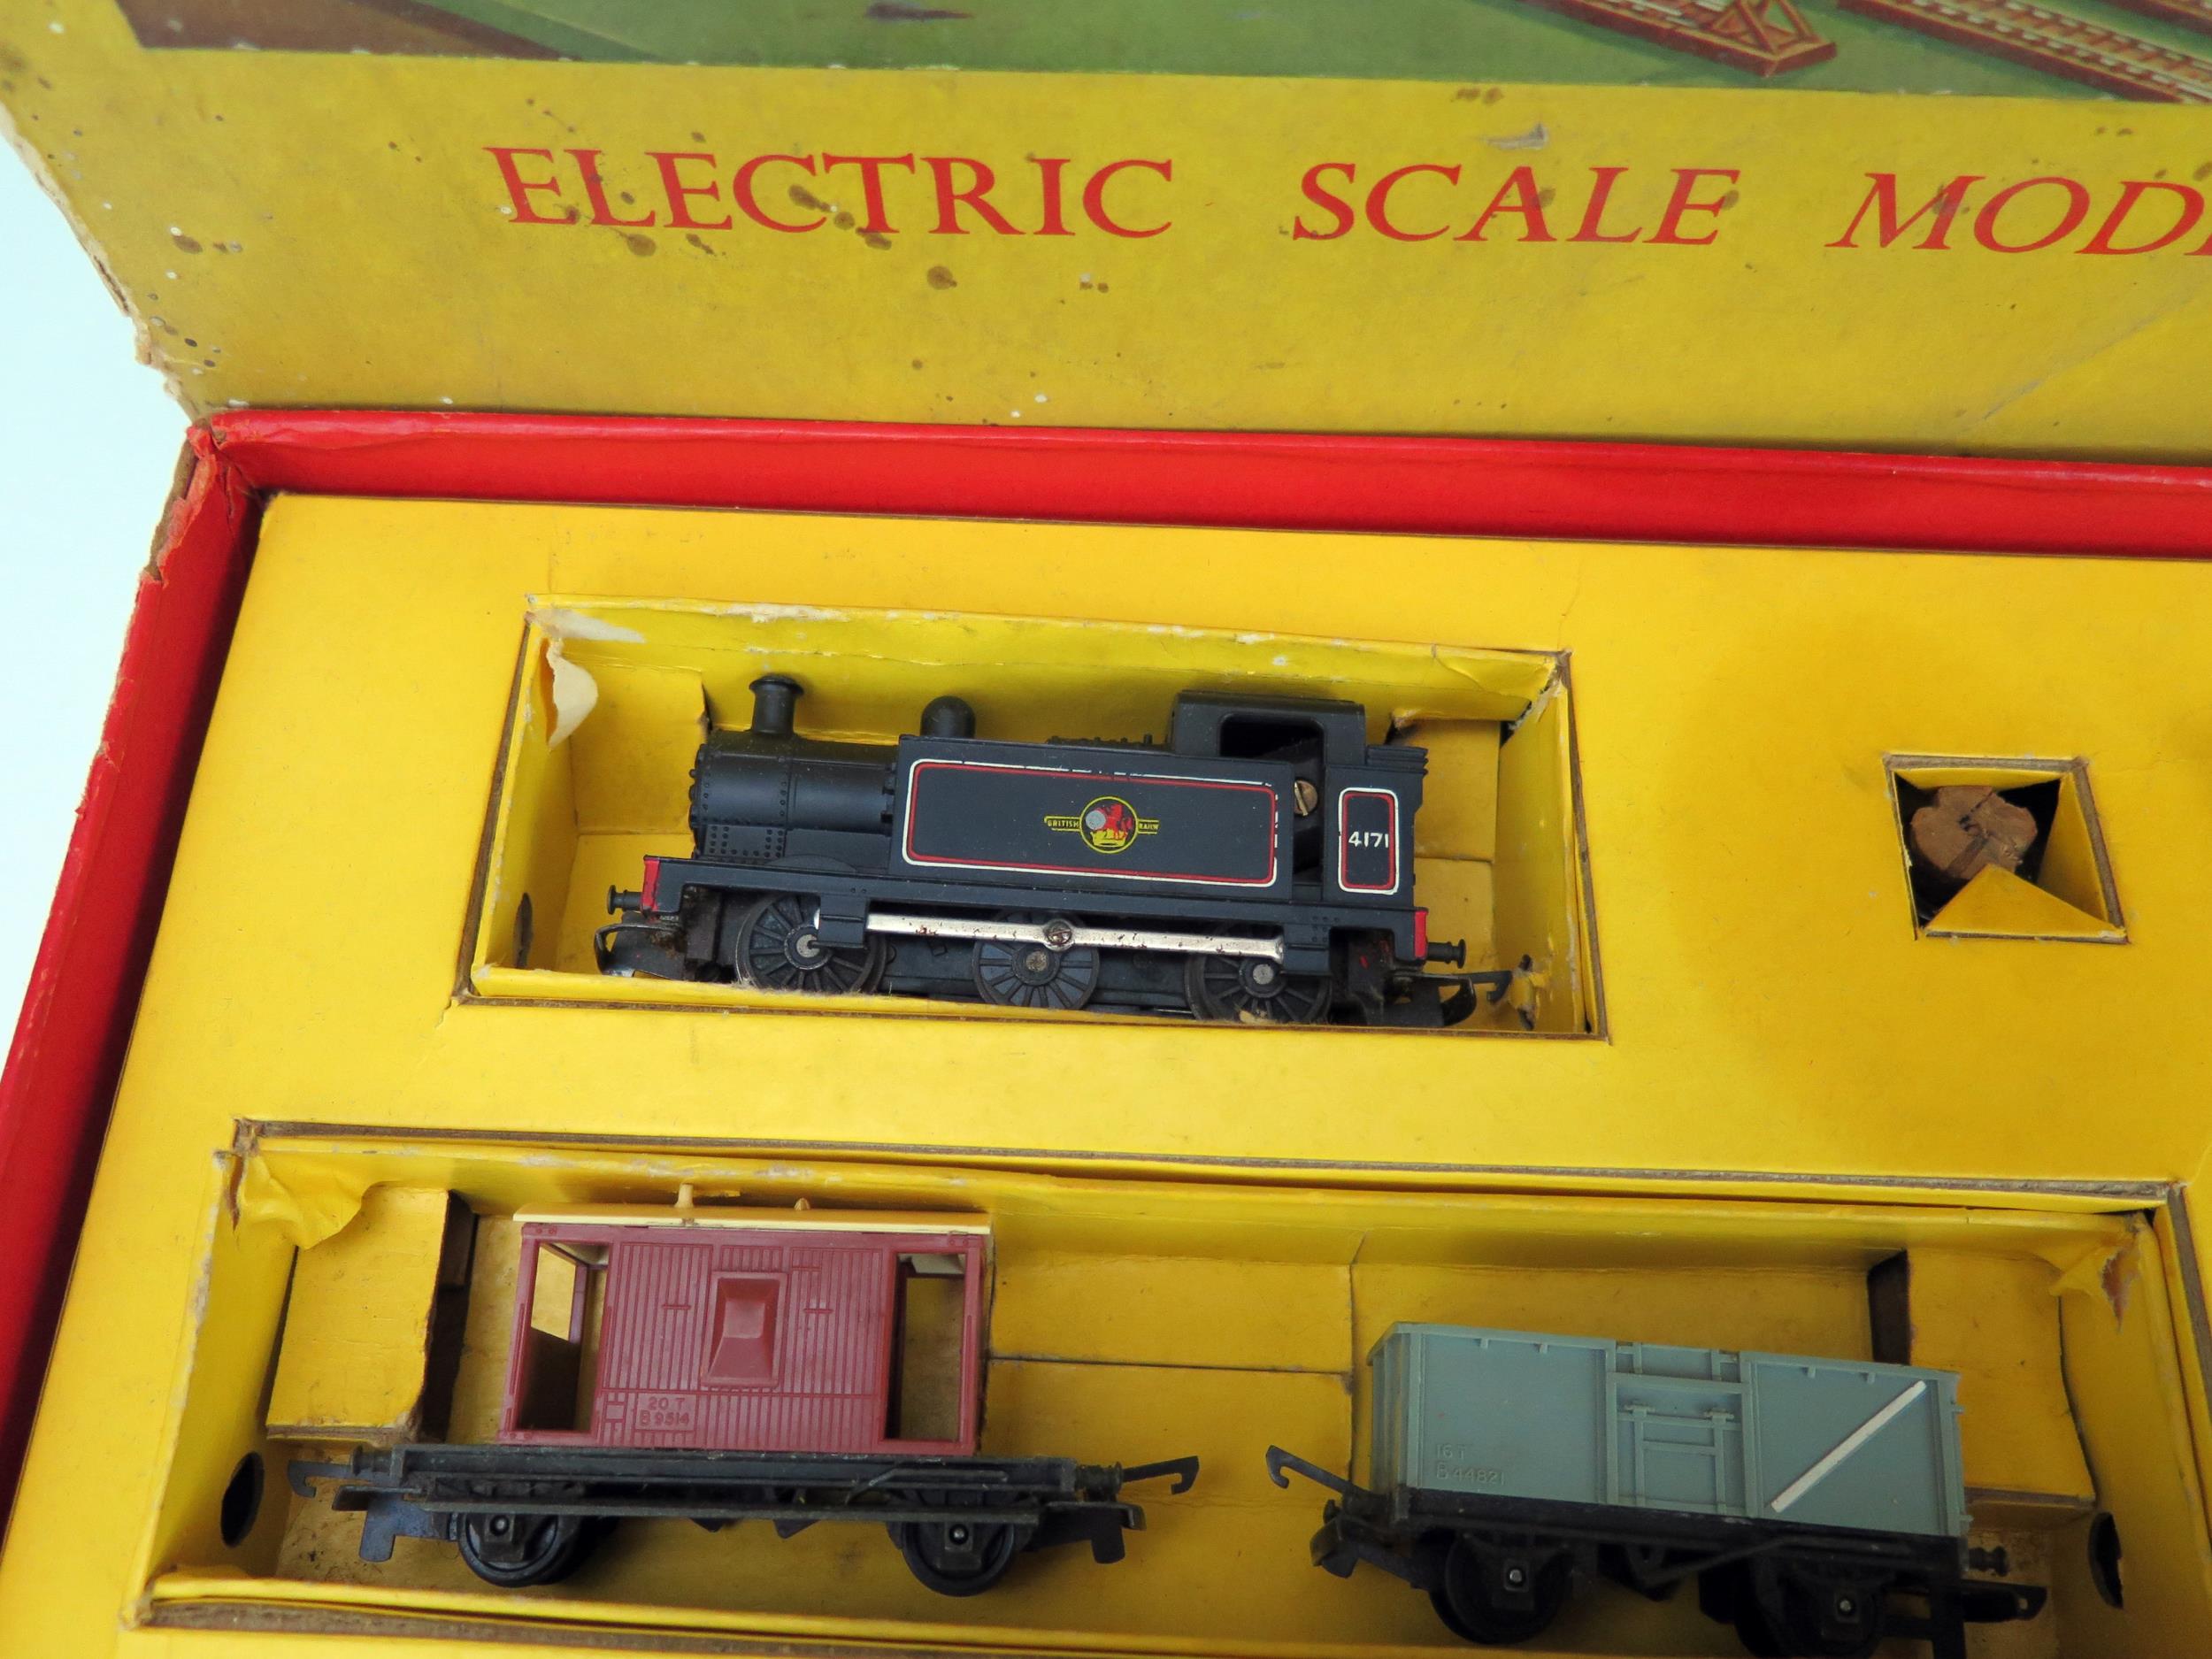 Triang Railways TT Gauge TB Electric Train Goods Set with 0-6-0 3F Jinty Loco No. 4171. Very good in - Image 3 of 3